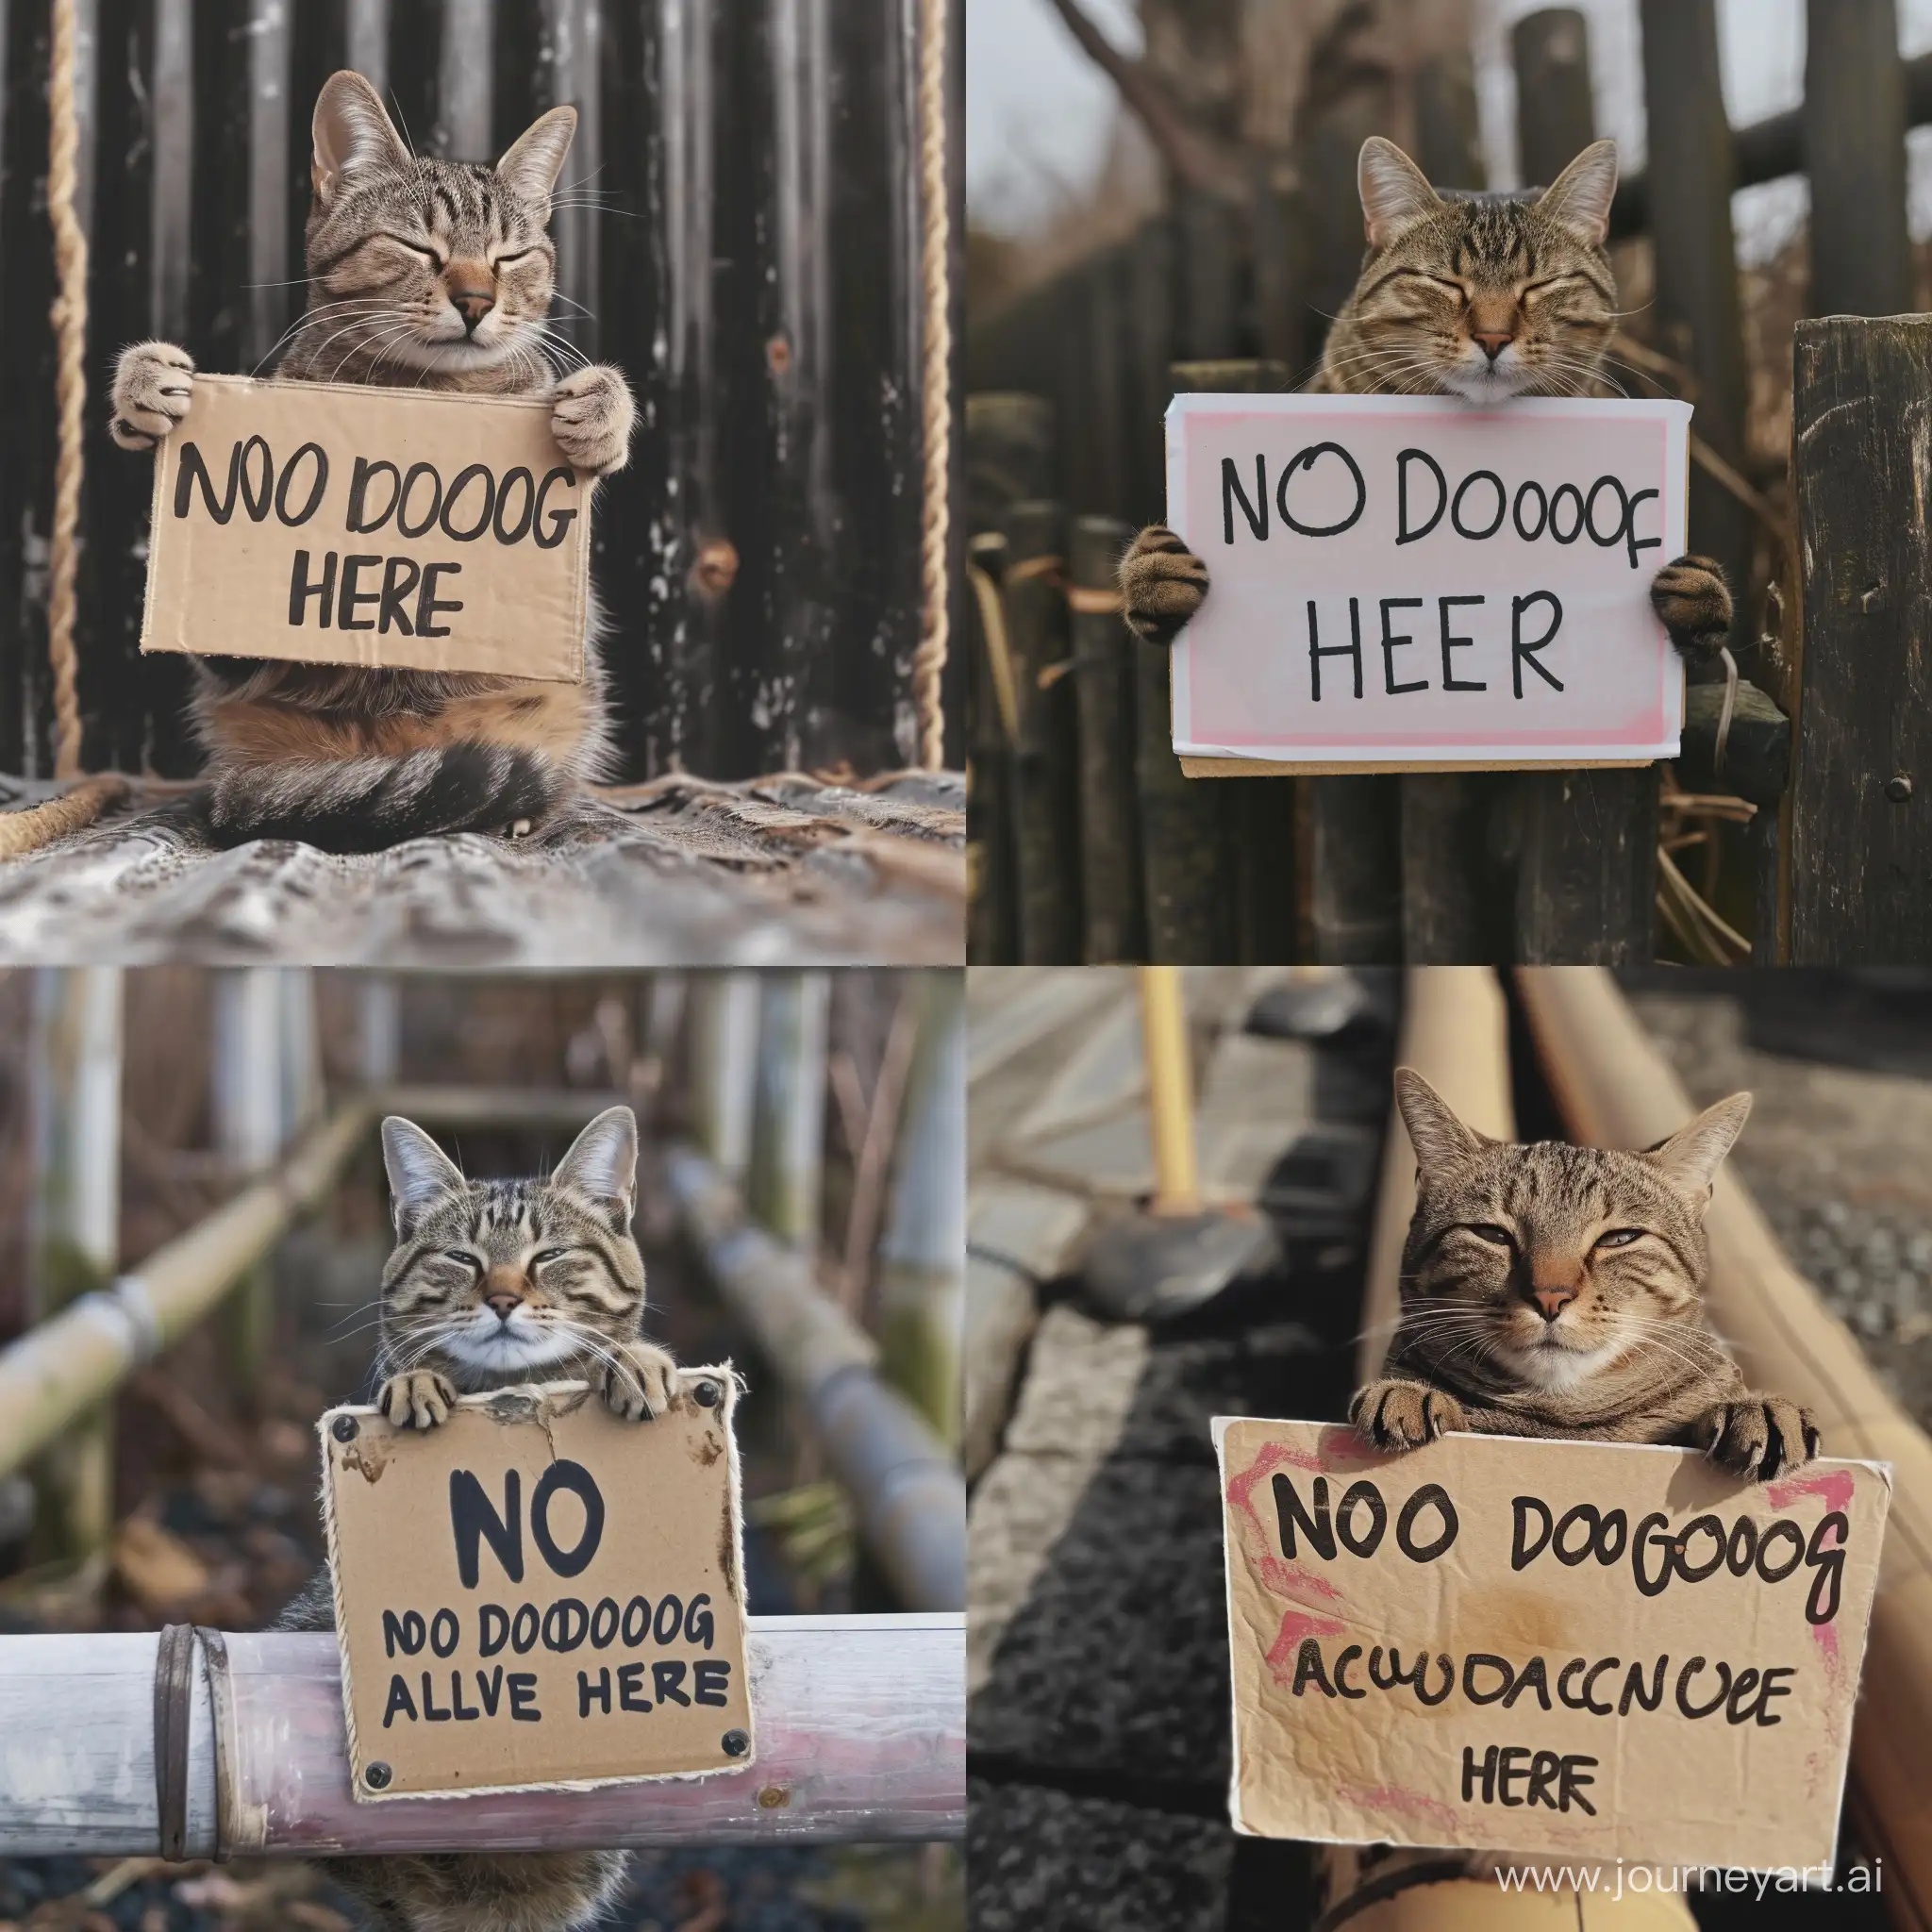 cat holding a sign saying "NO DOGS ALLOWED HERE"